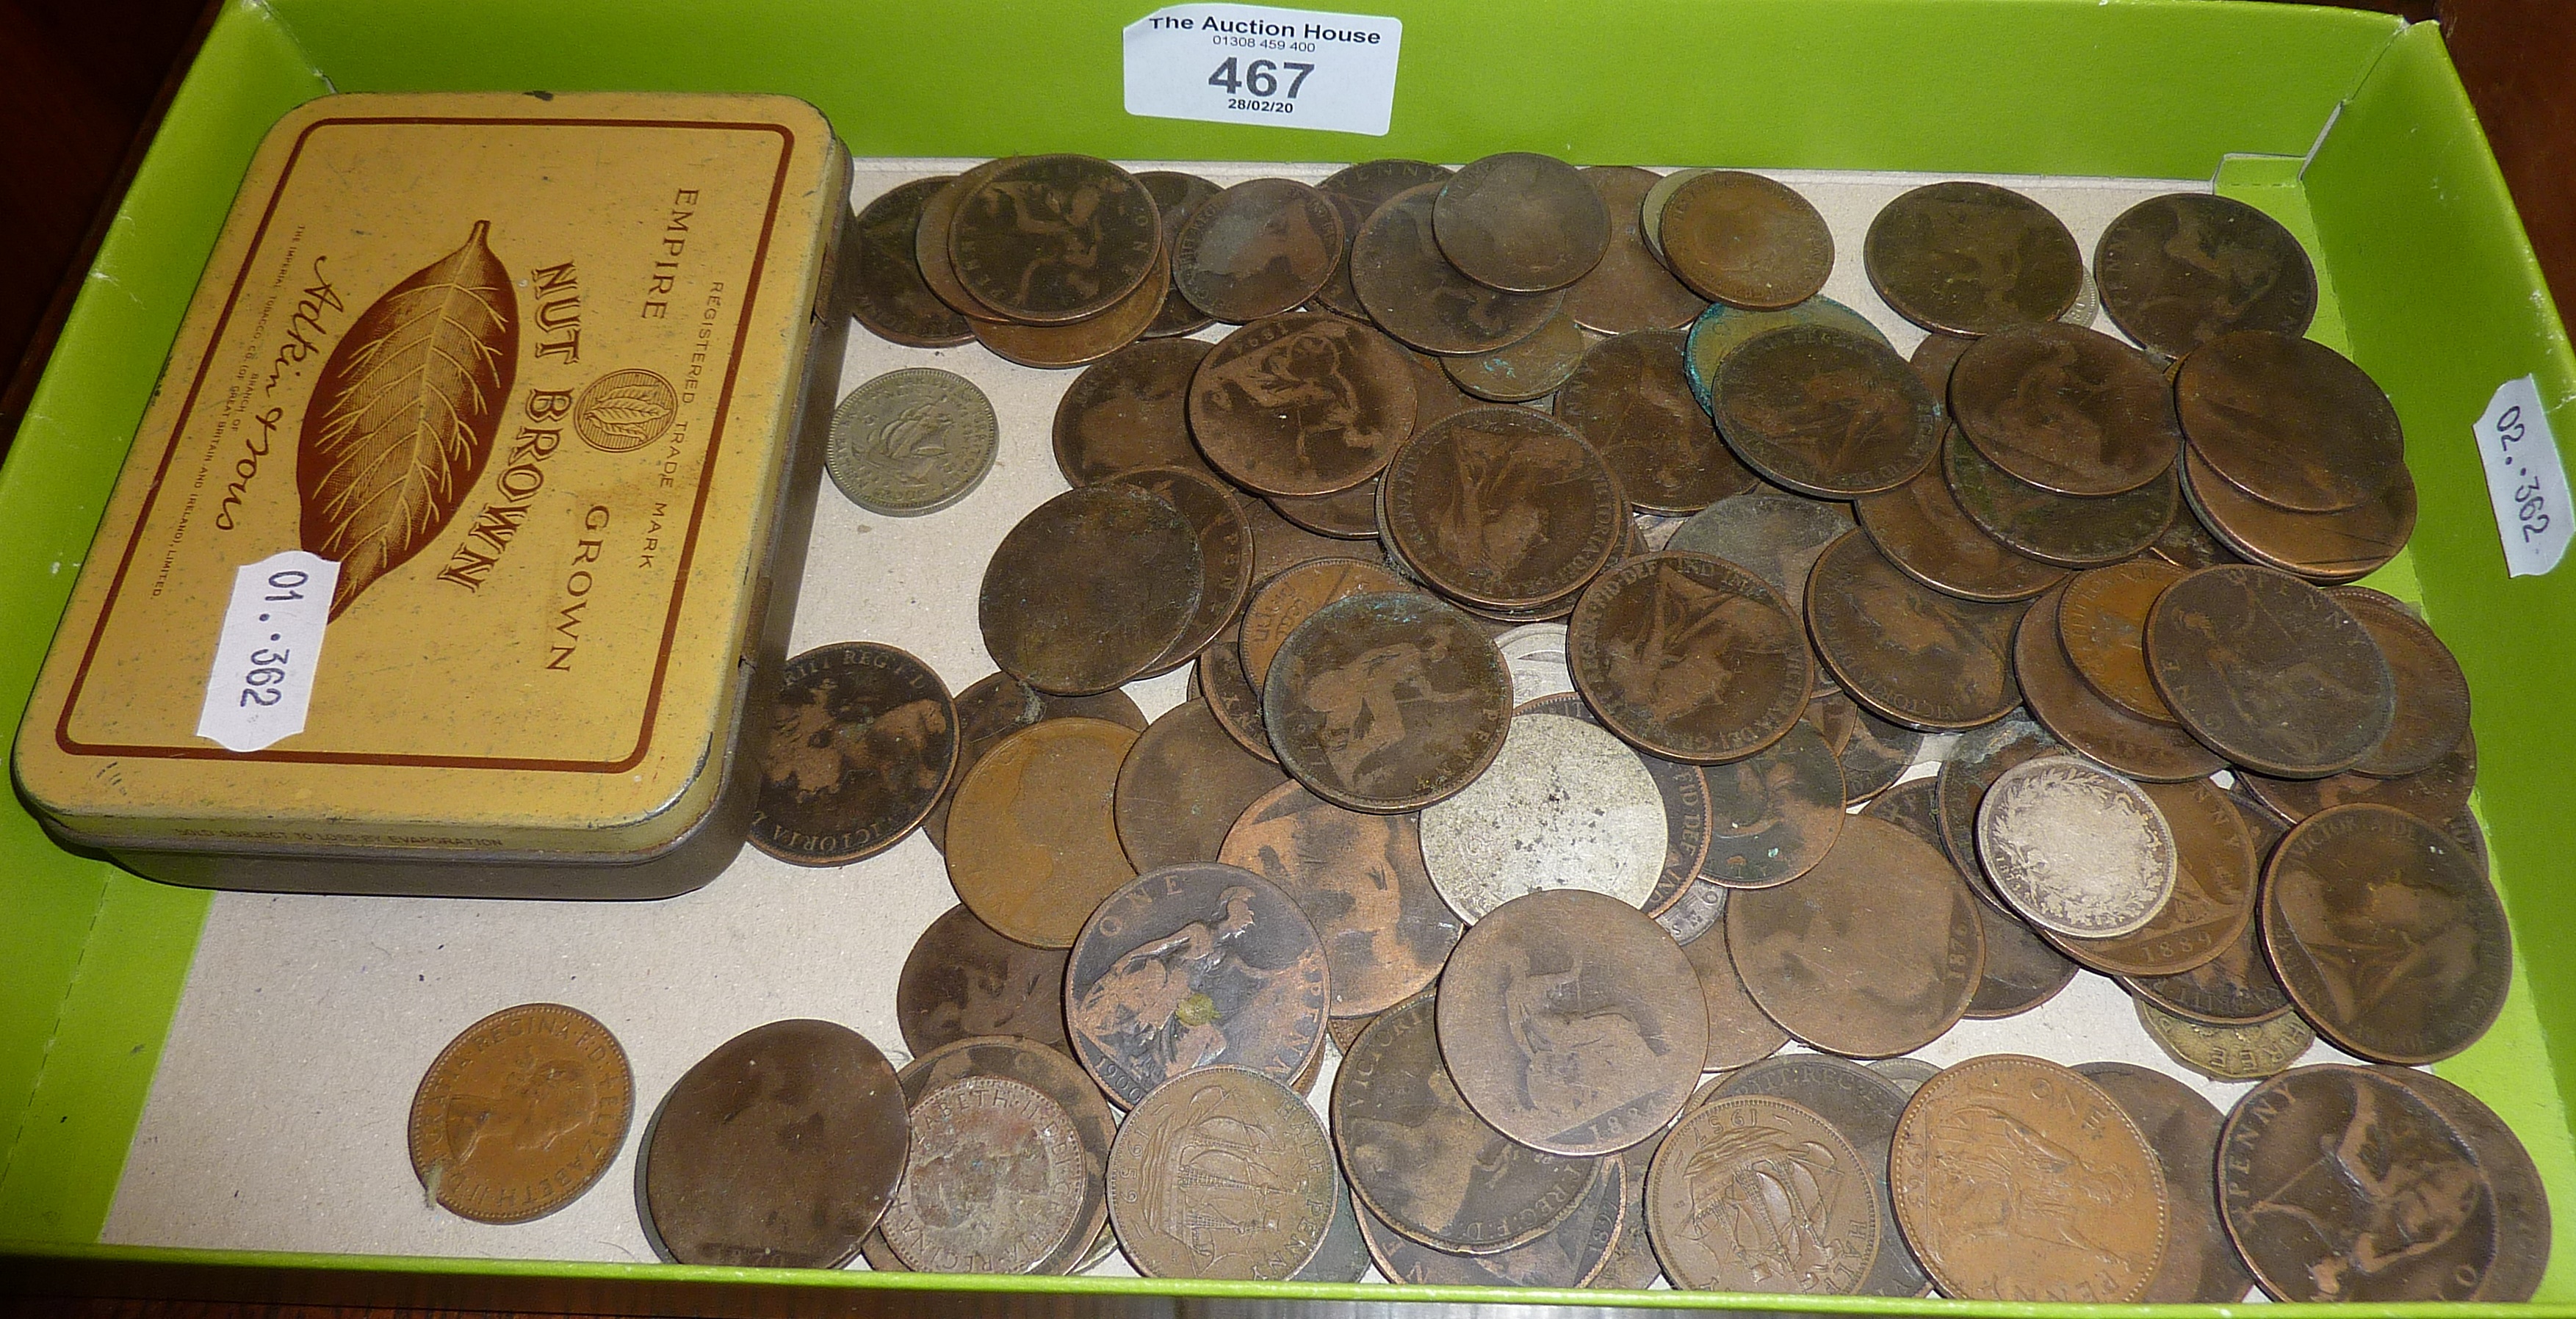 Assorted old British coins